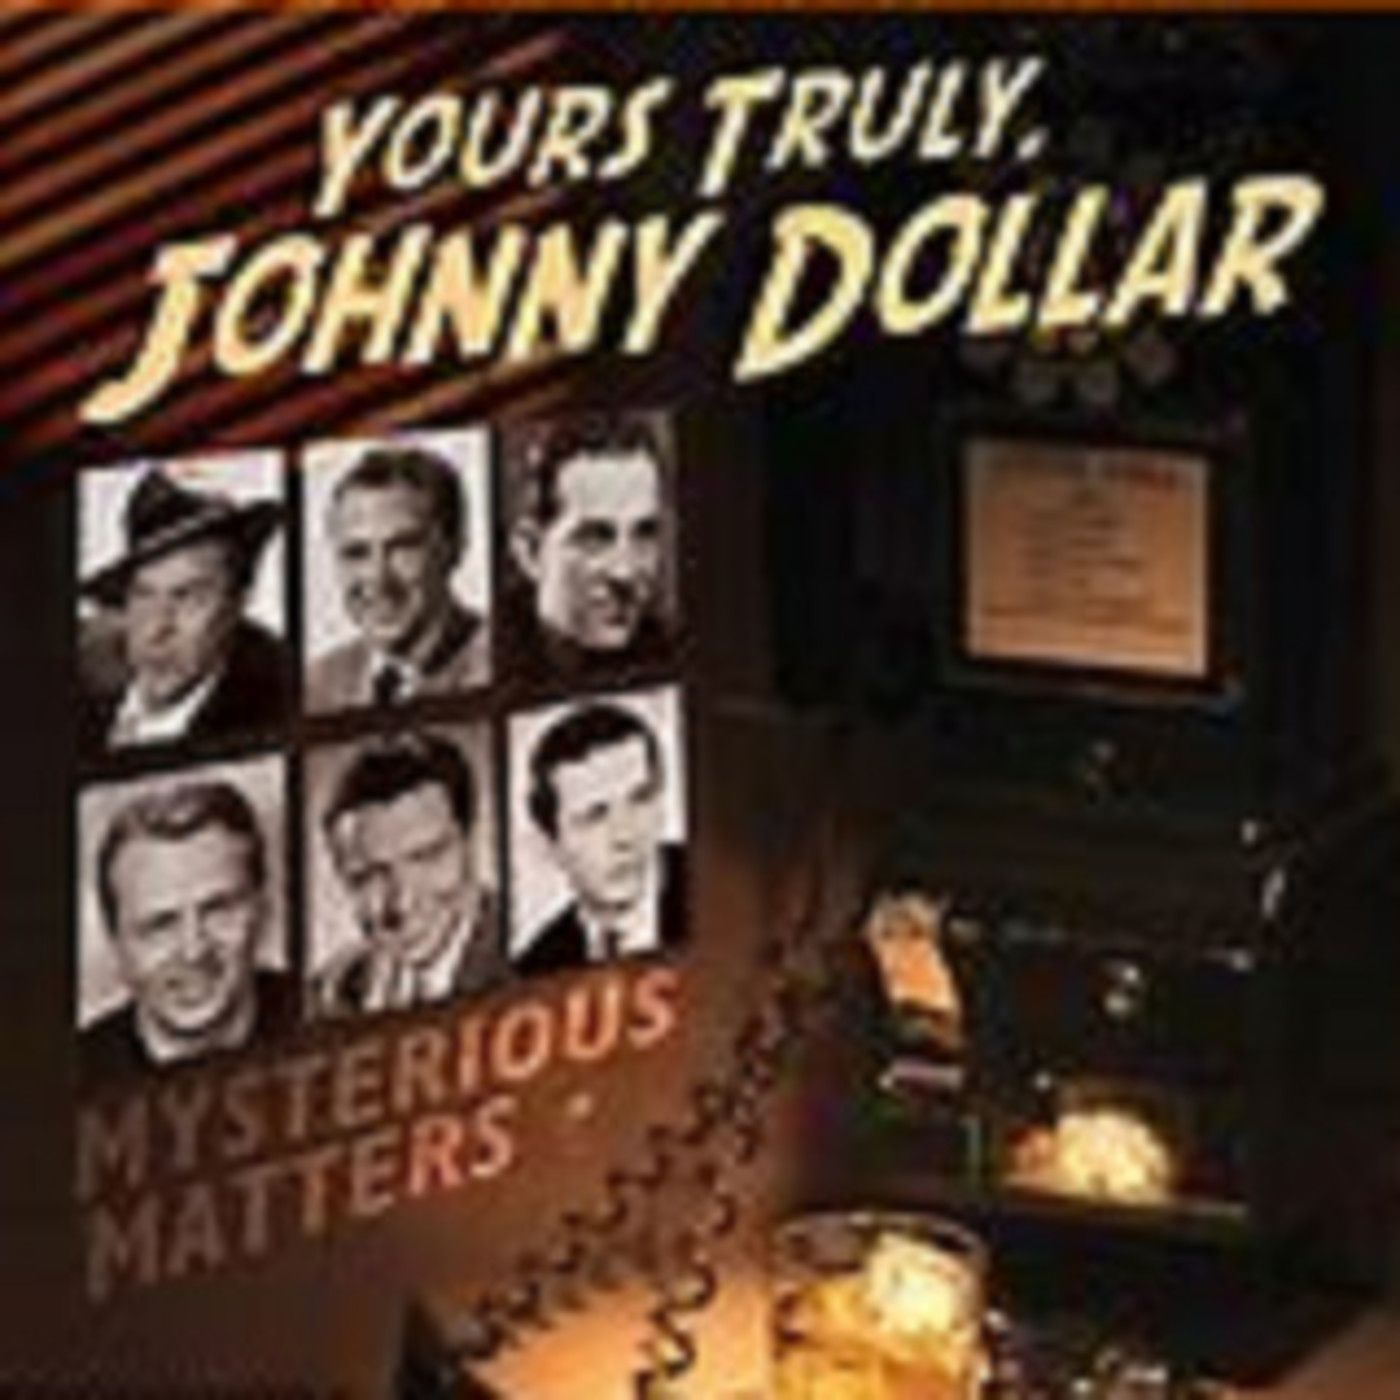 Yours Truly, Johnny Dollar - 071760, episode 698 - The Back to the Back Matter (AFRS)